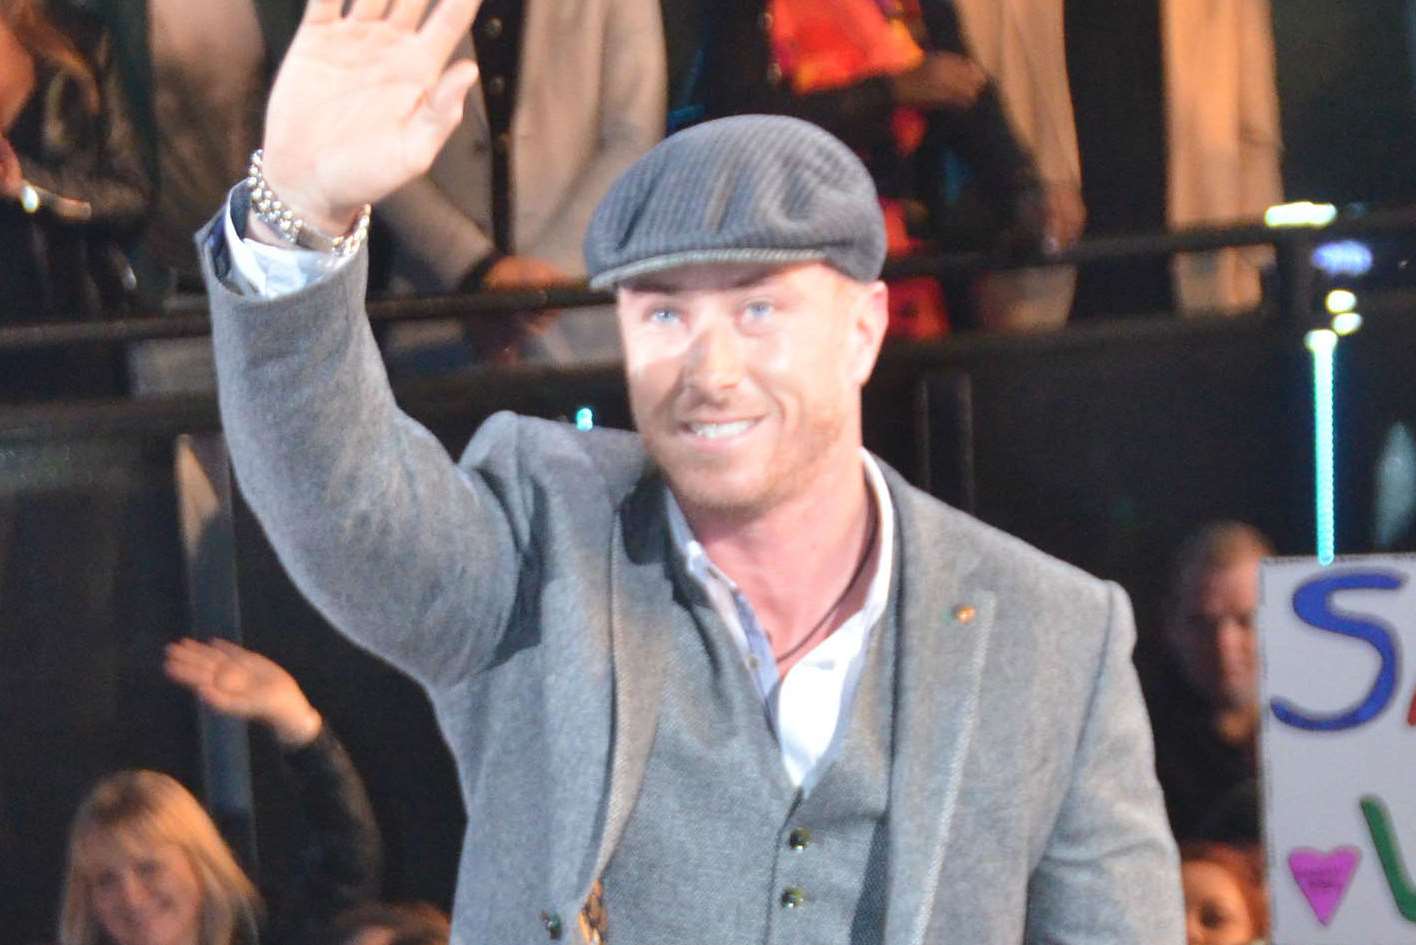 James Jordan enters the Celebrity Big Brother house. Picture: Channel 5